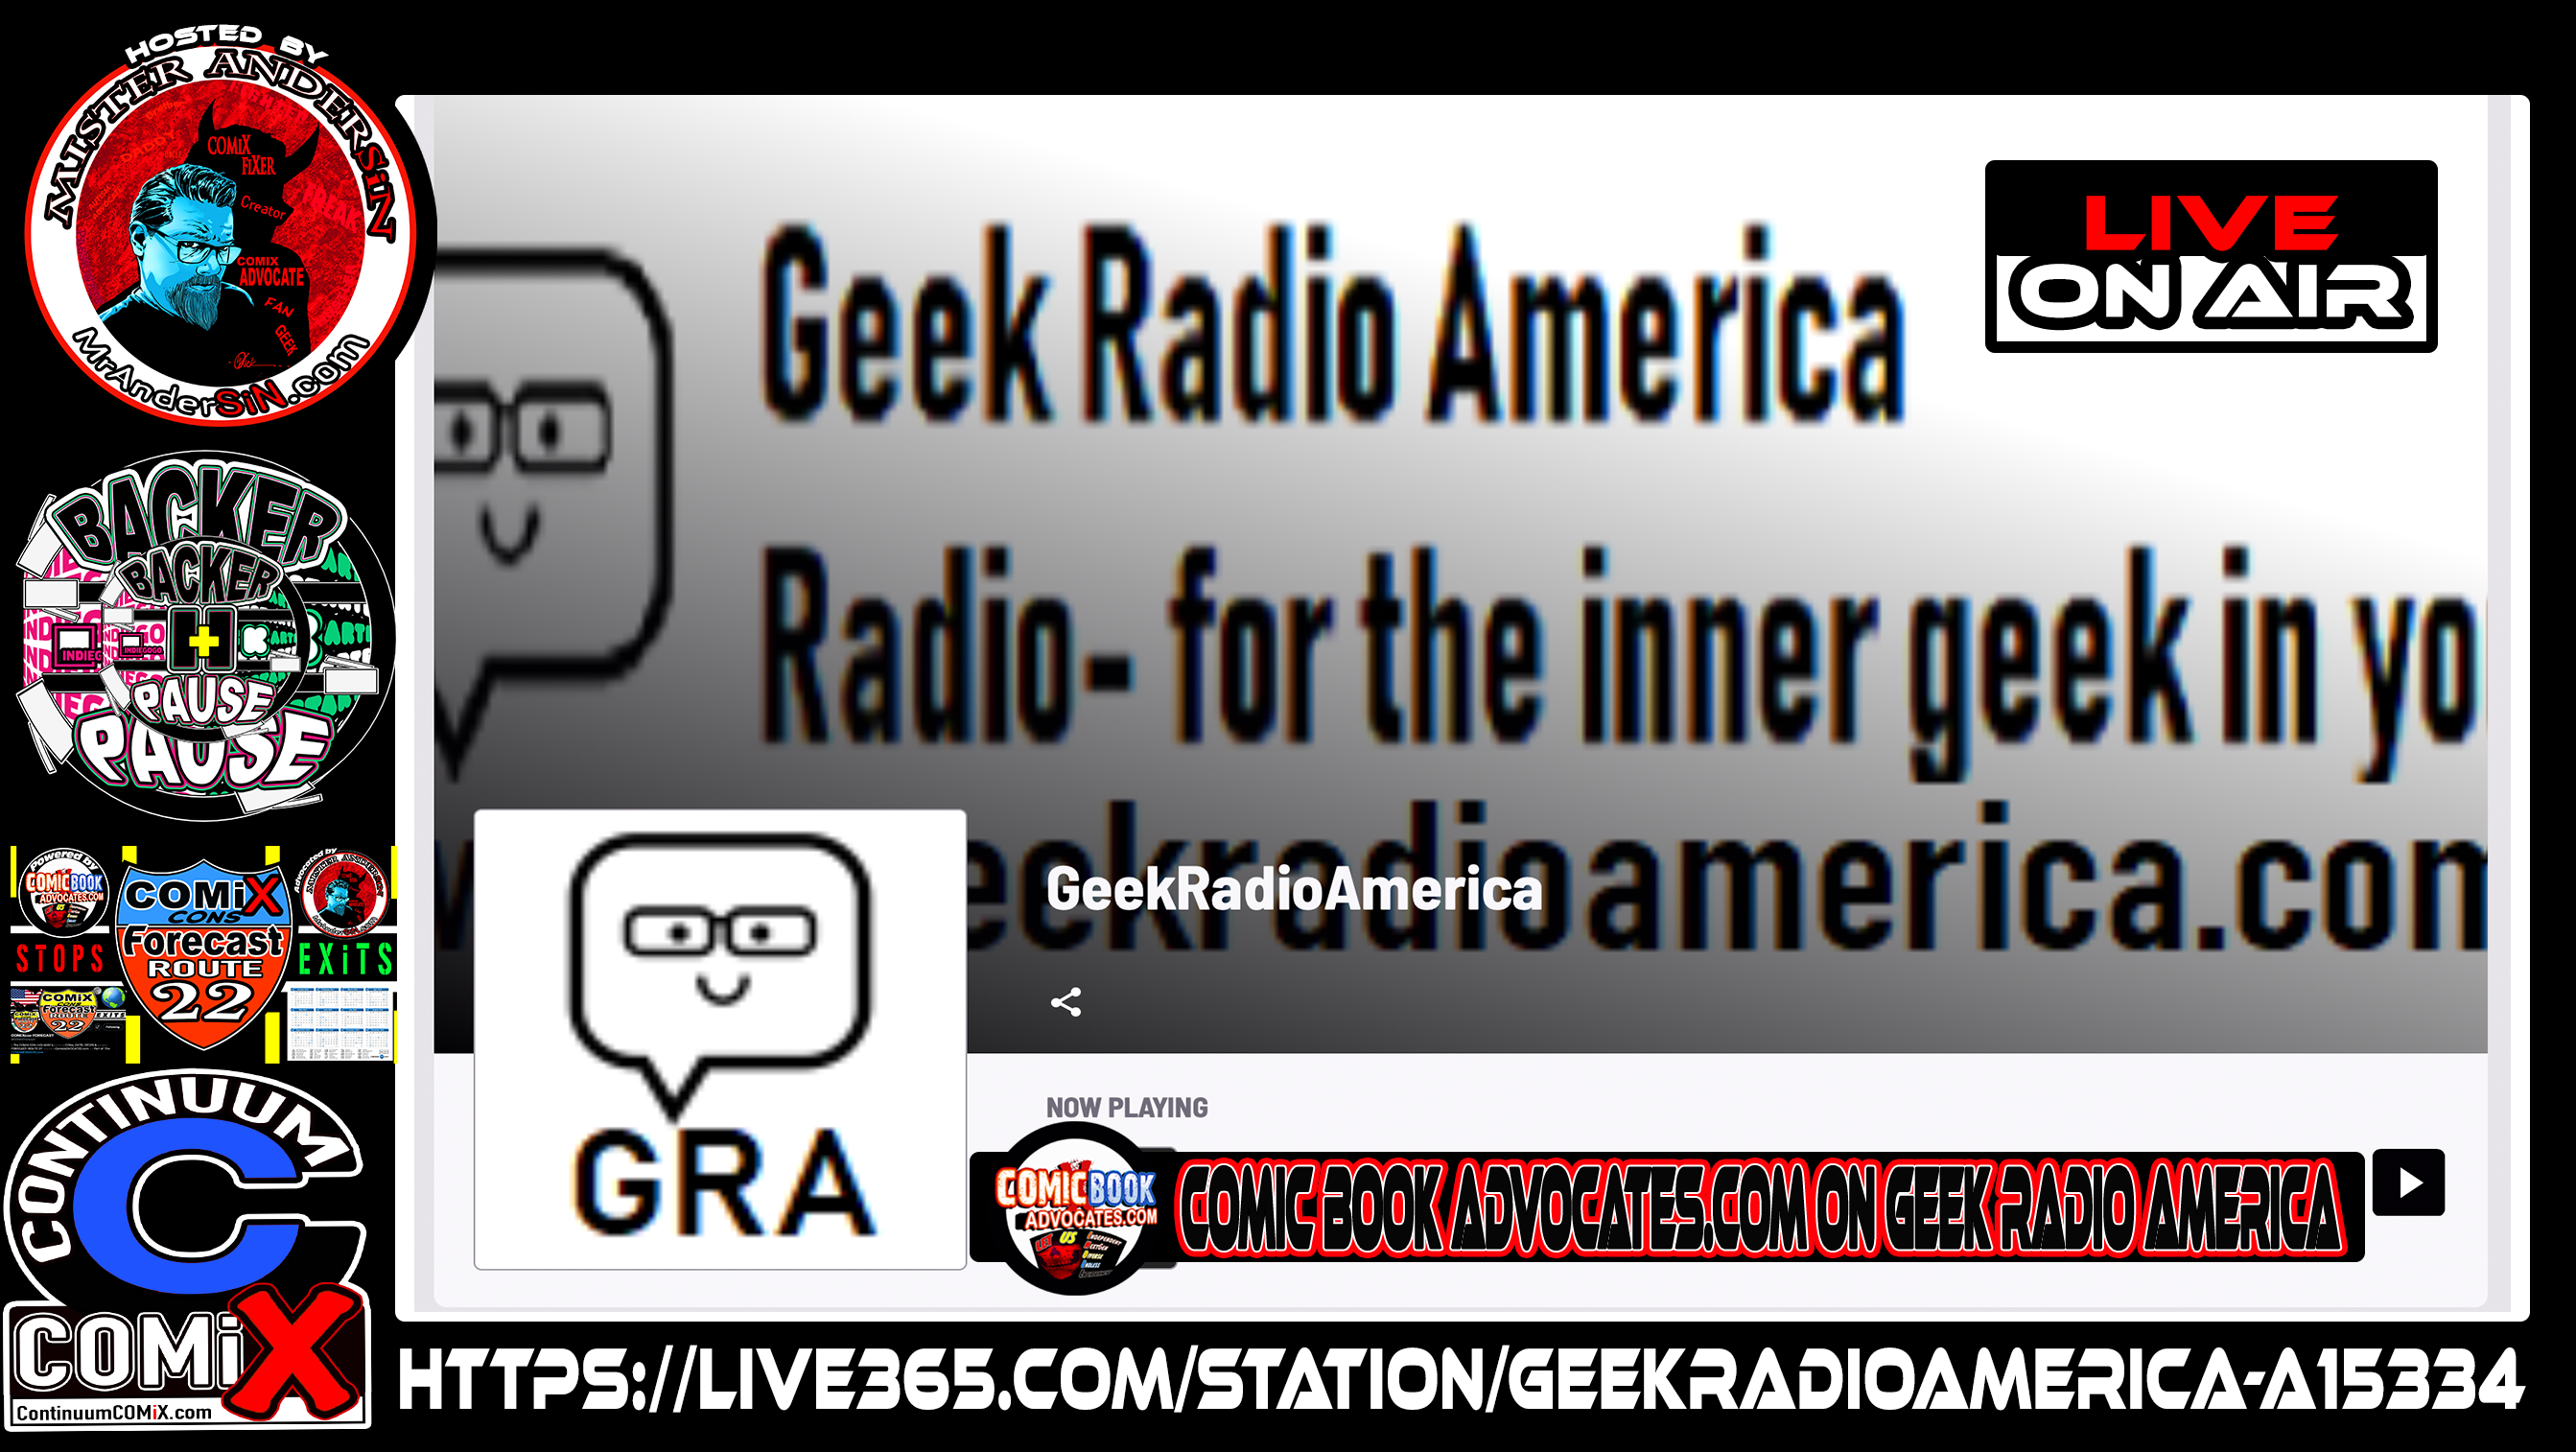 Backer Pause & COMiX Forecast on Book Advocates.com on GEEK RADIO AMERICA Presents or Now